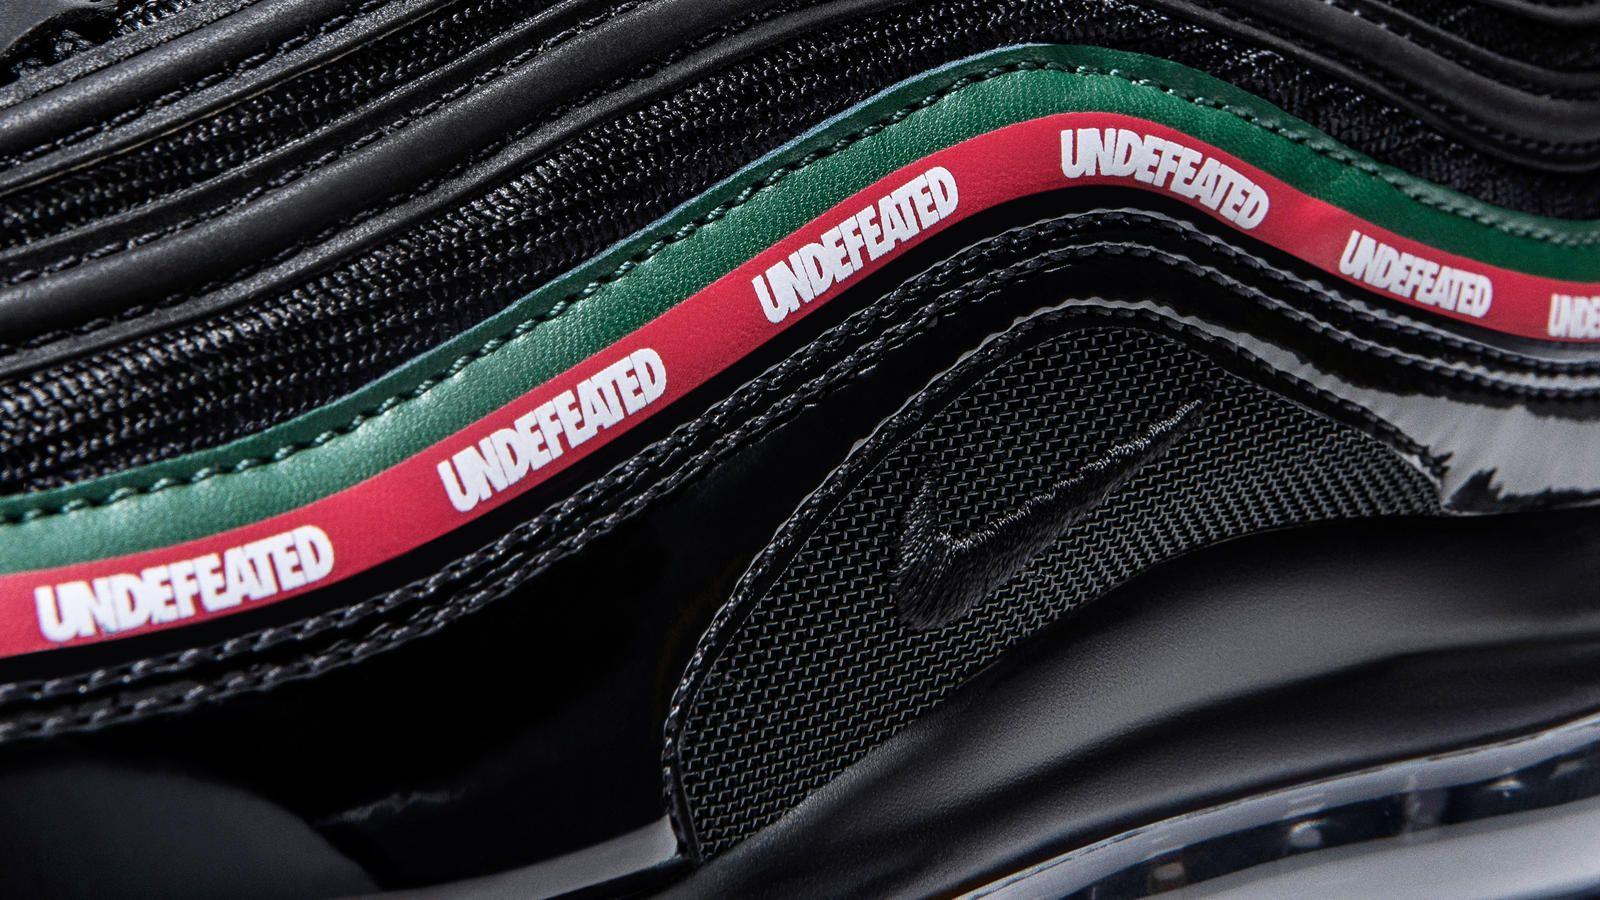 Nike Undefeated Logo - UNDFTD Gives the Air Max 97 a Luxury Twist - Nike News